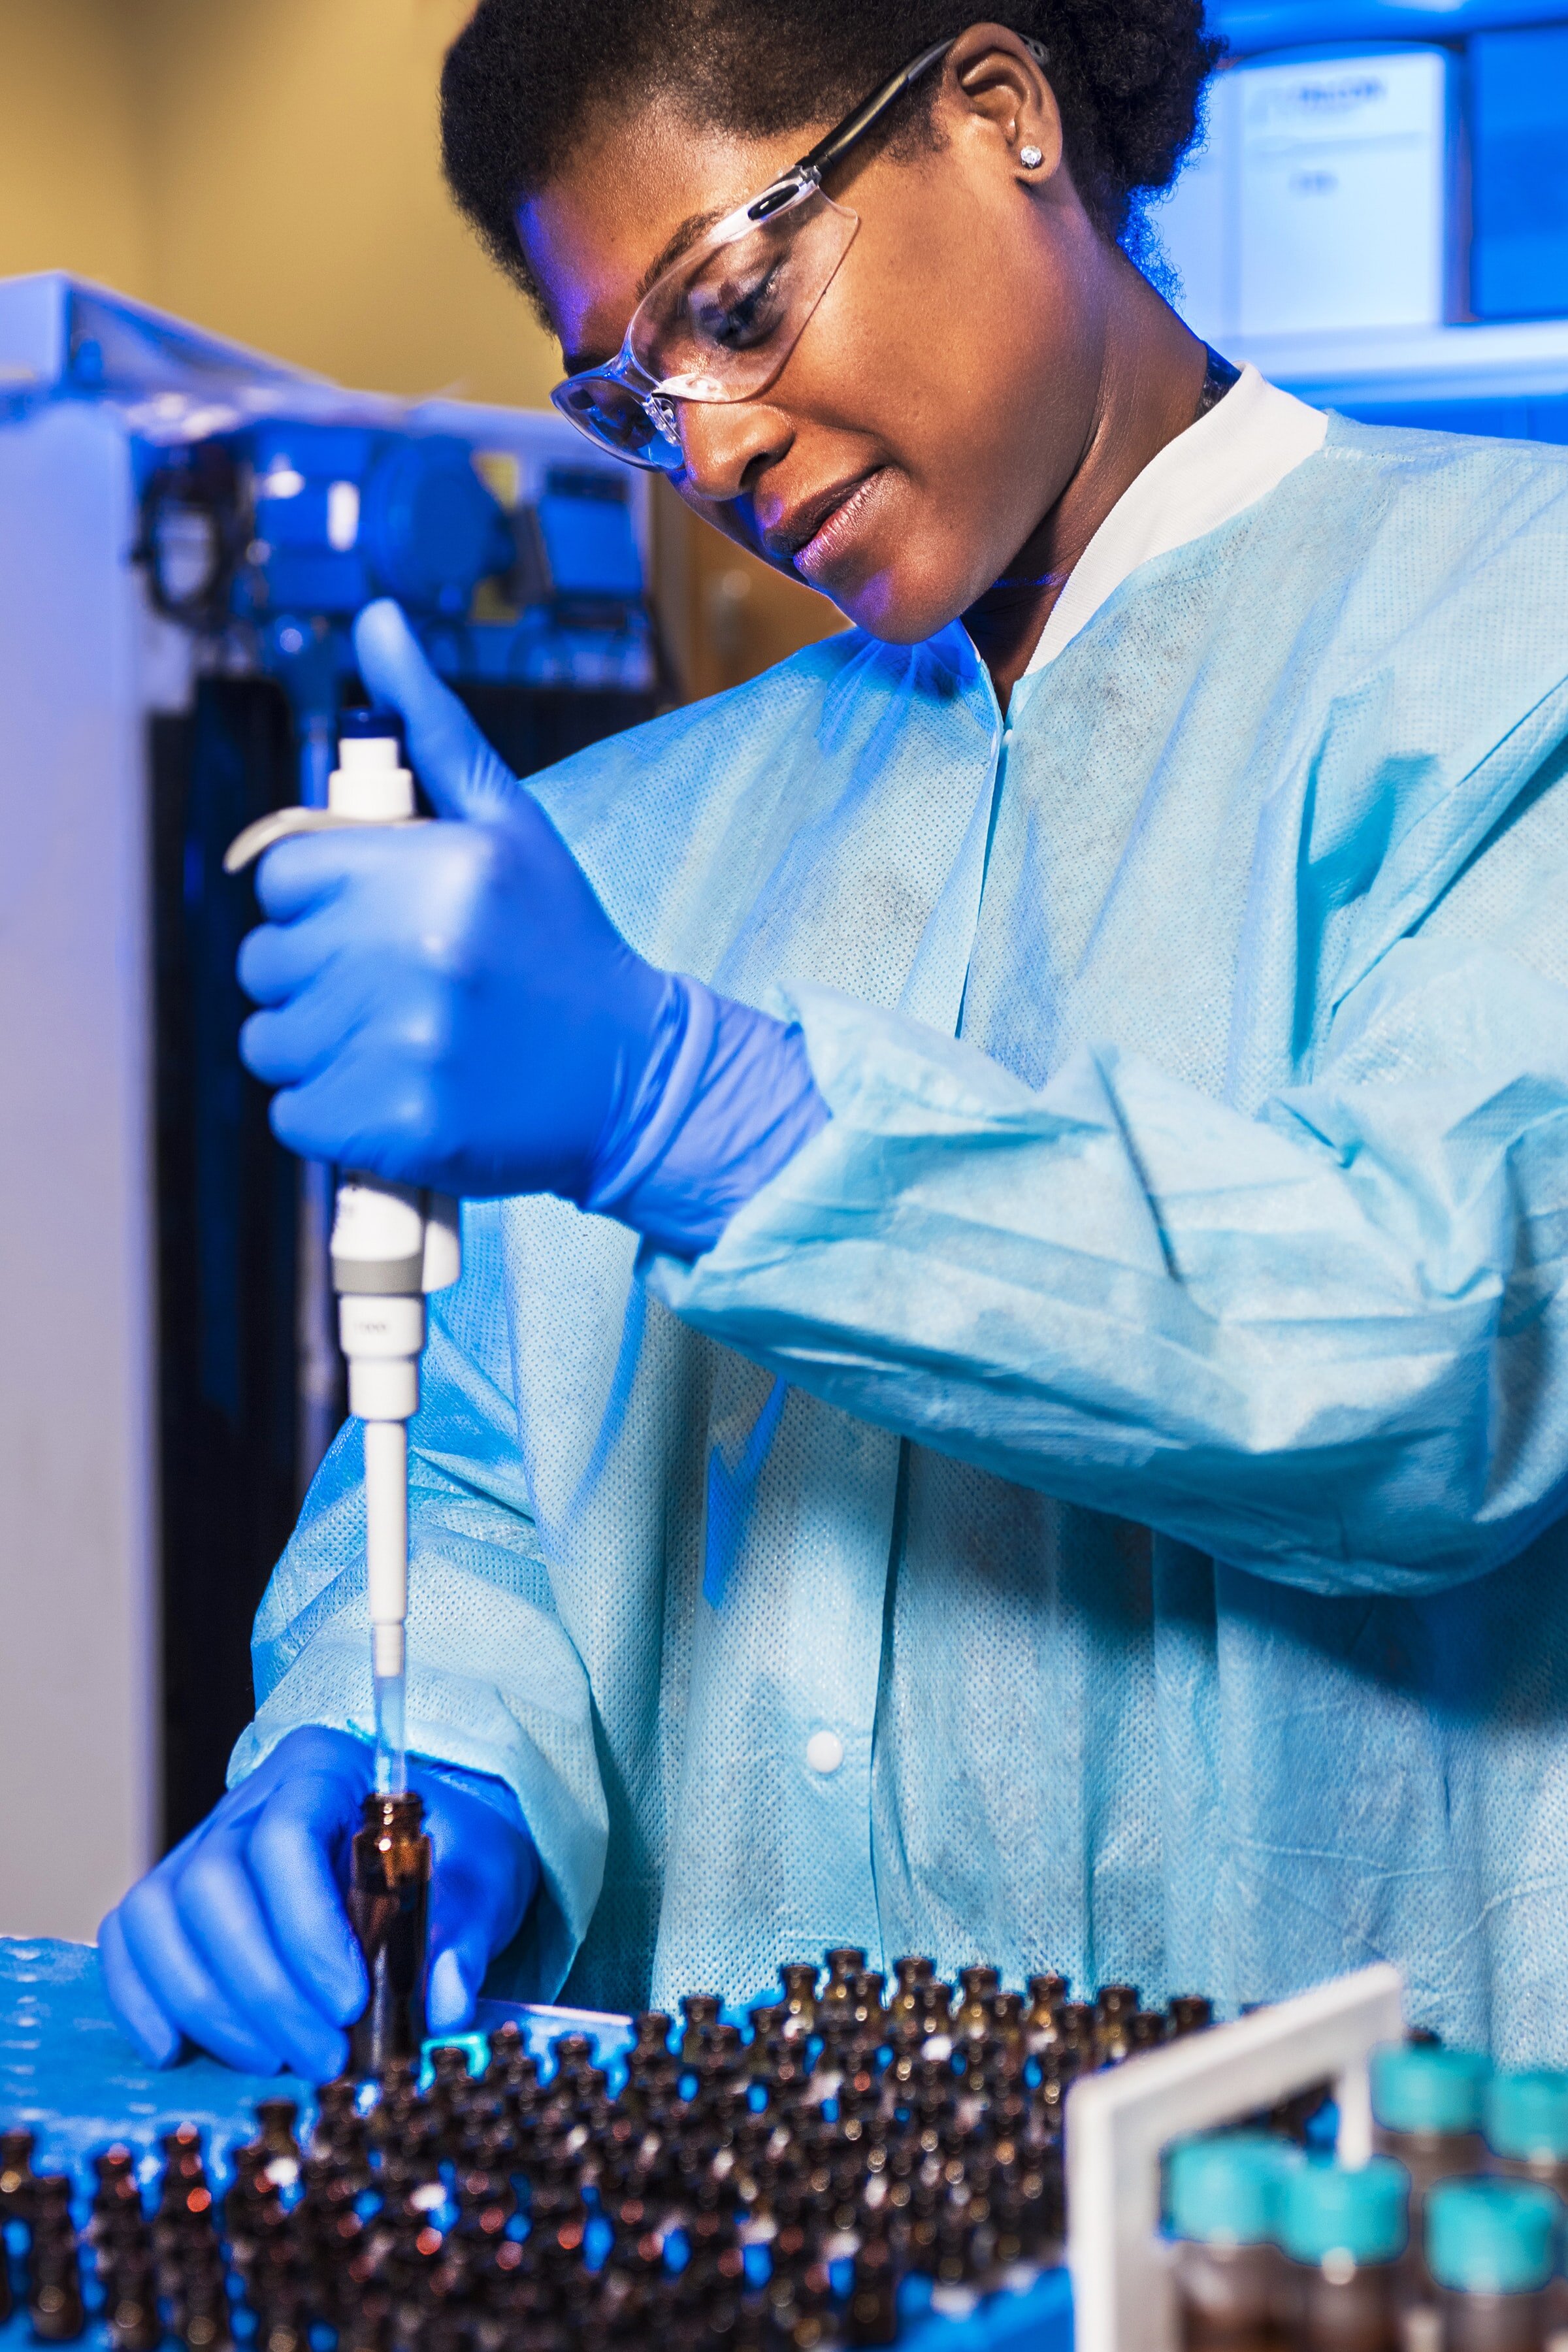 Photo of a researcher using a research device on a brown bottle by CDC on Unsplash.